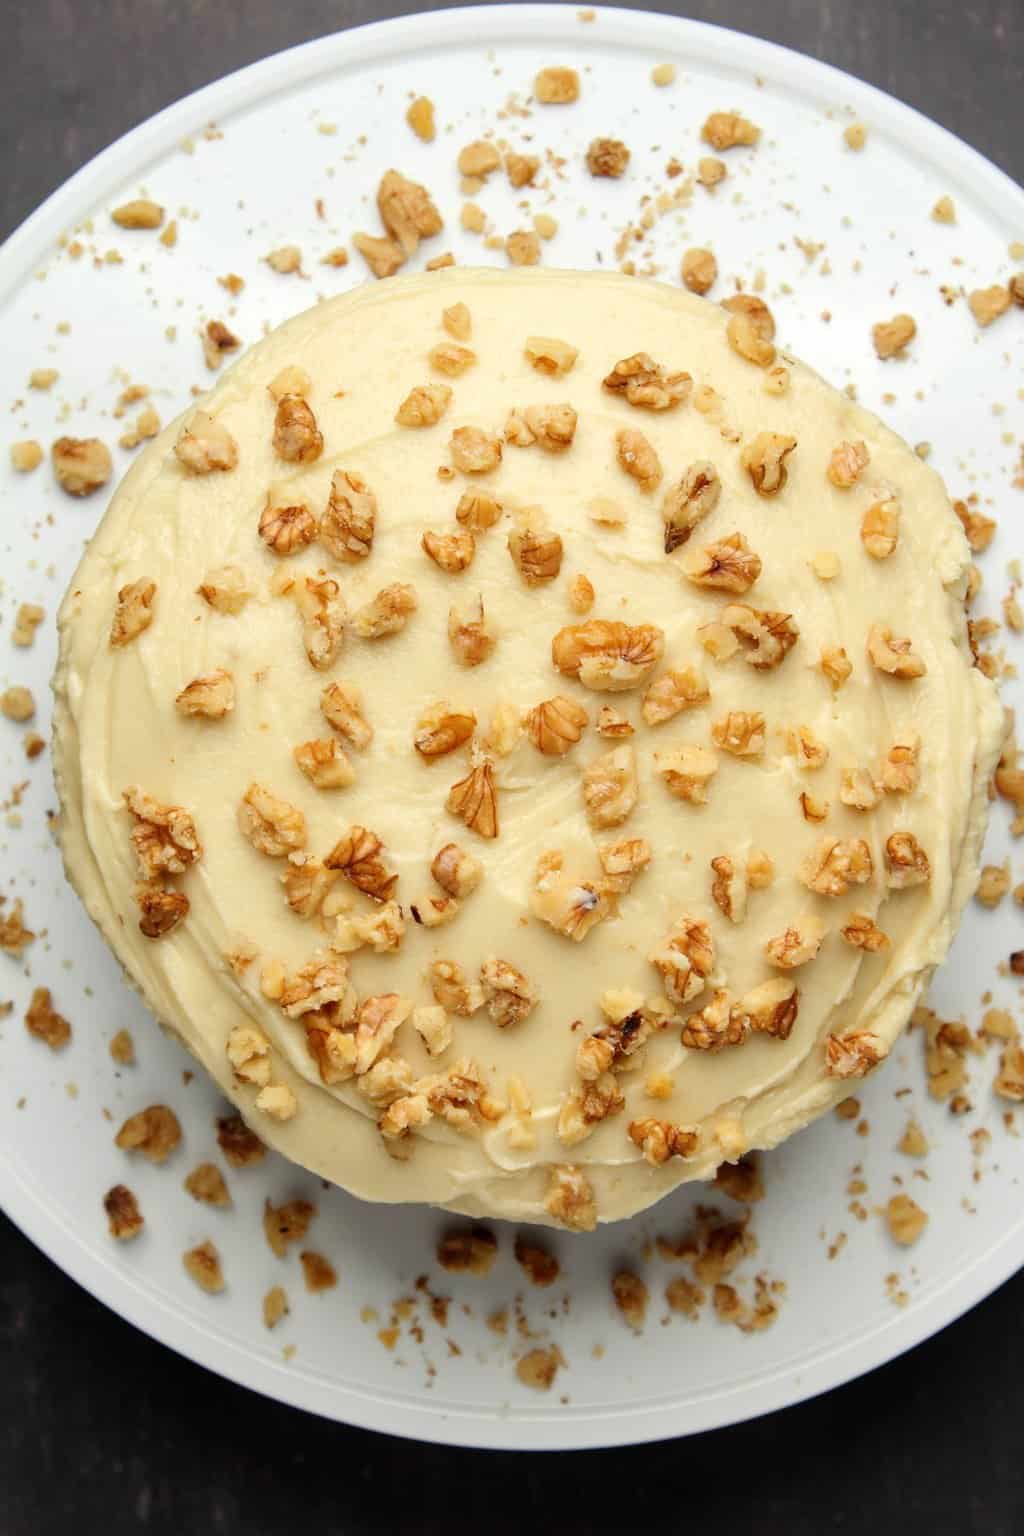 Vegan cream cheese frosting topped with crushed walnuts on a carrot cake. 